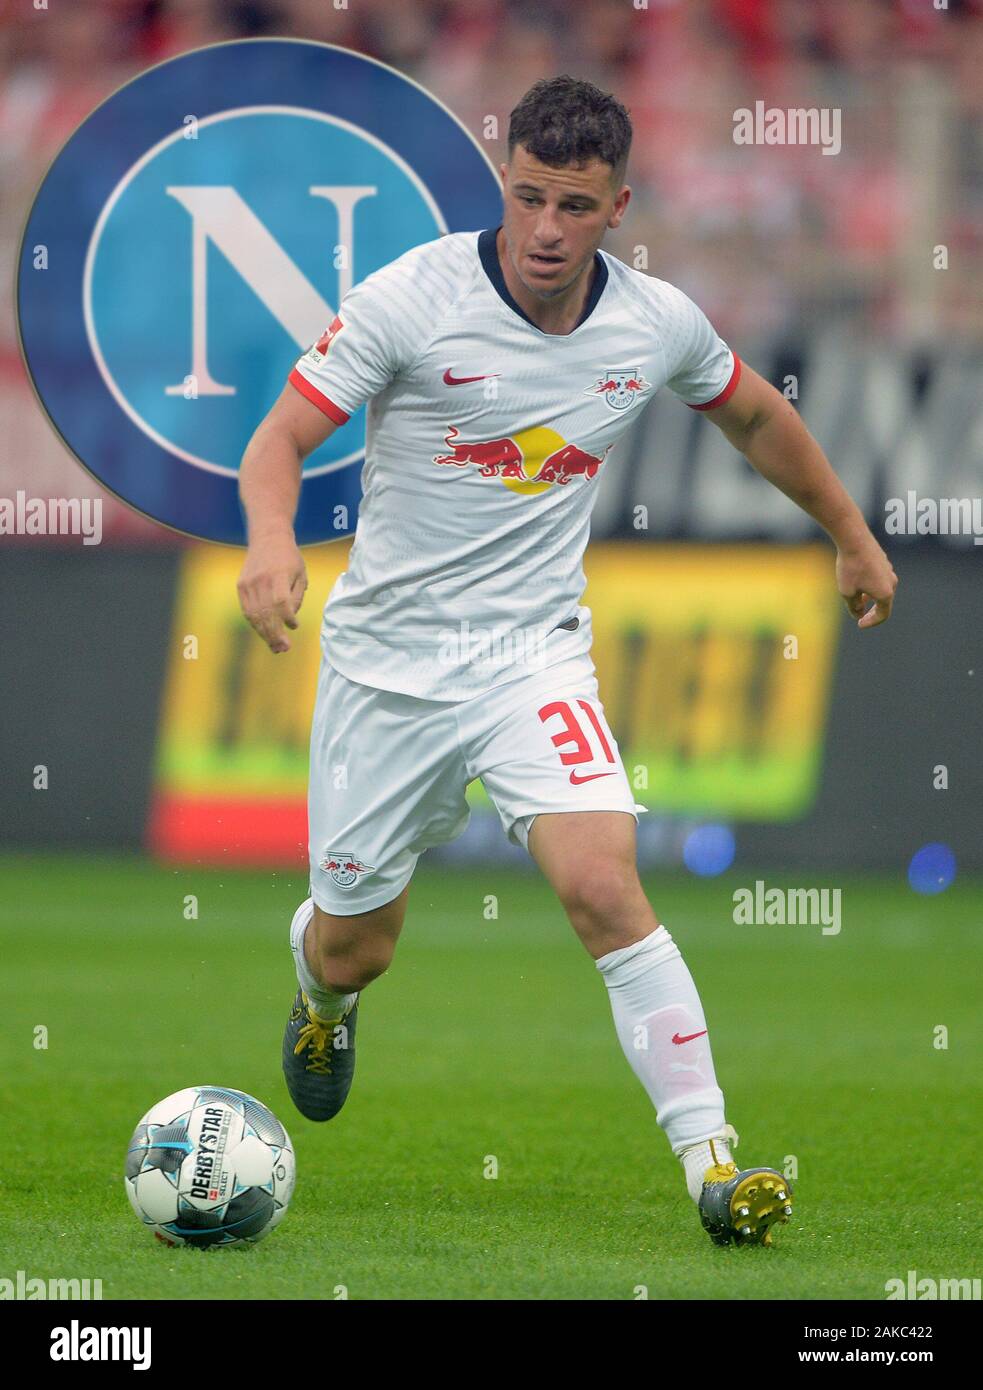 PHOTO ASSEMBLY: Diego DEMME (L) changes to SSC Napoli. Archive photo: Diego DEMME (L), Soccer 1. Bundesliga, 1. matchday, 1.Union Berlin (UB) - RB Leipzig (L) 0: 4, on August 18, 2019 in Berlin/Germany. | usage worldwide Stock Photo